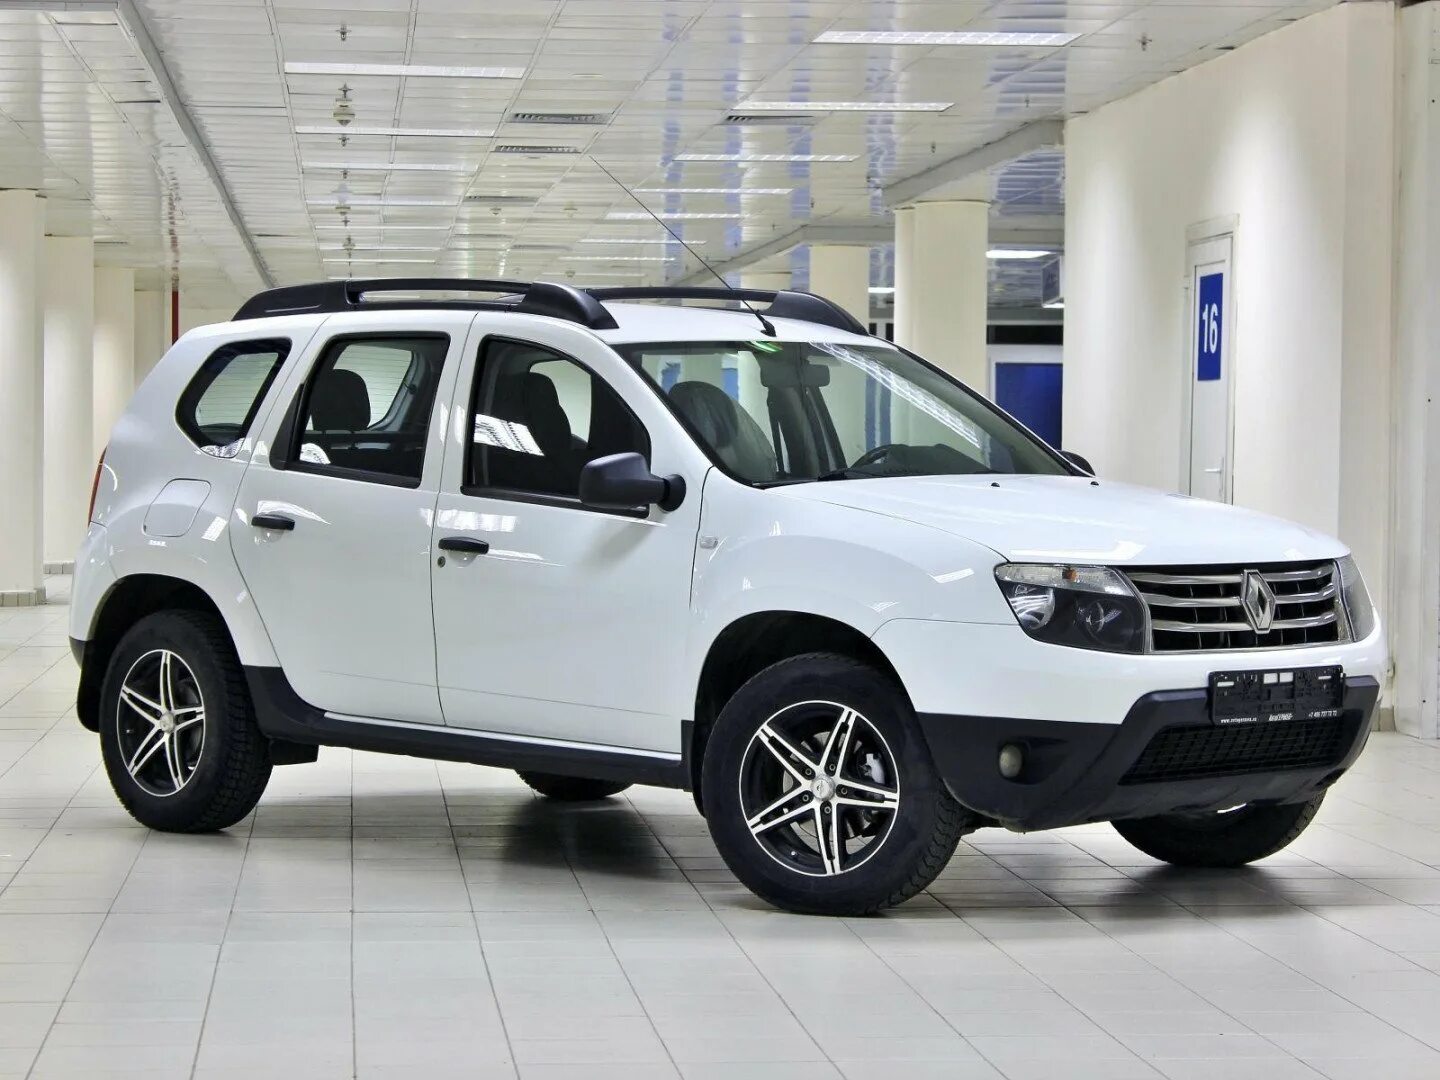 Renault duster 2014 год. Рено Дастер белый. Renault Duster 2011. Рено Дастер 2014 белый. Рено Дастер 2015 белый.